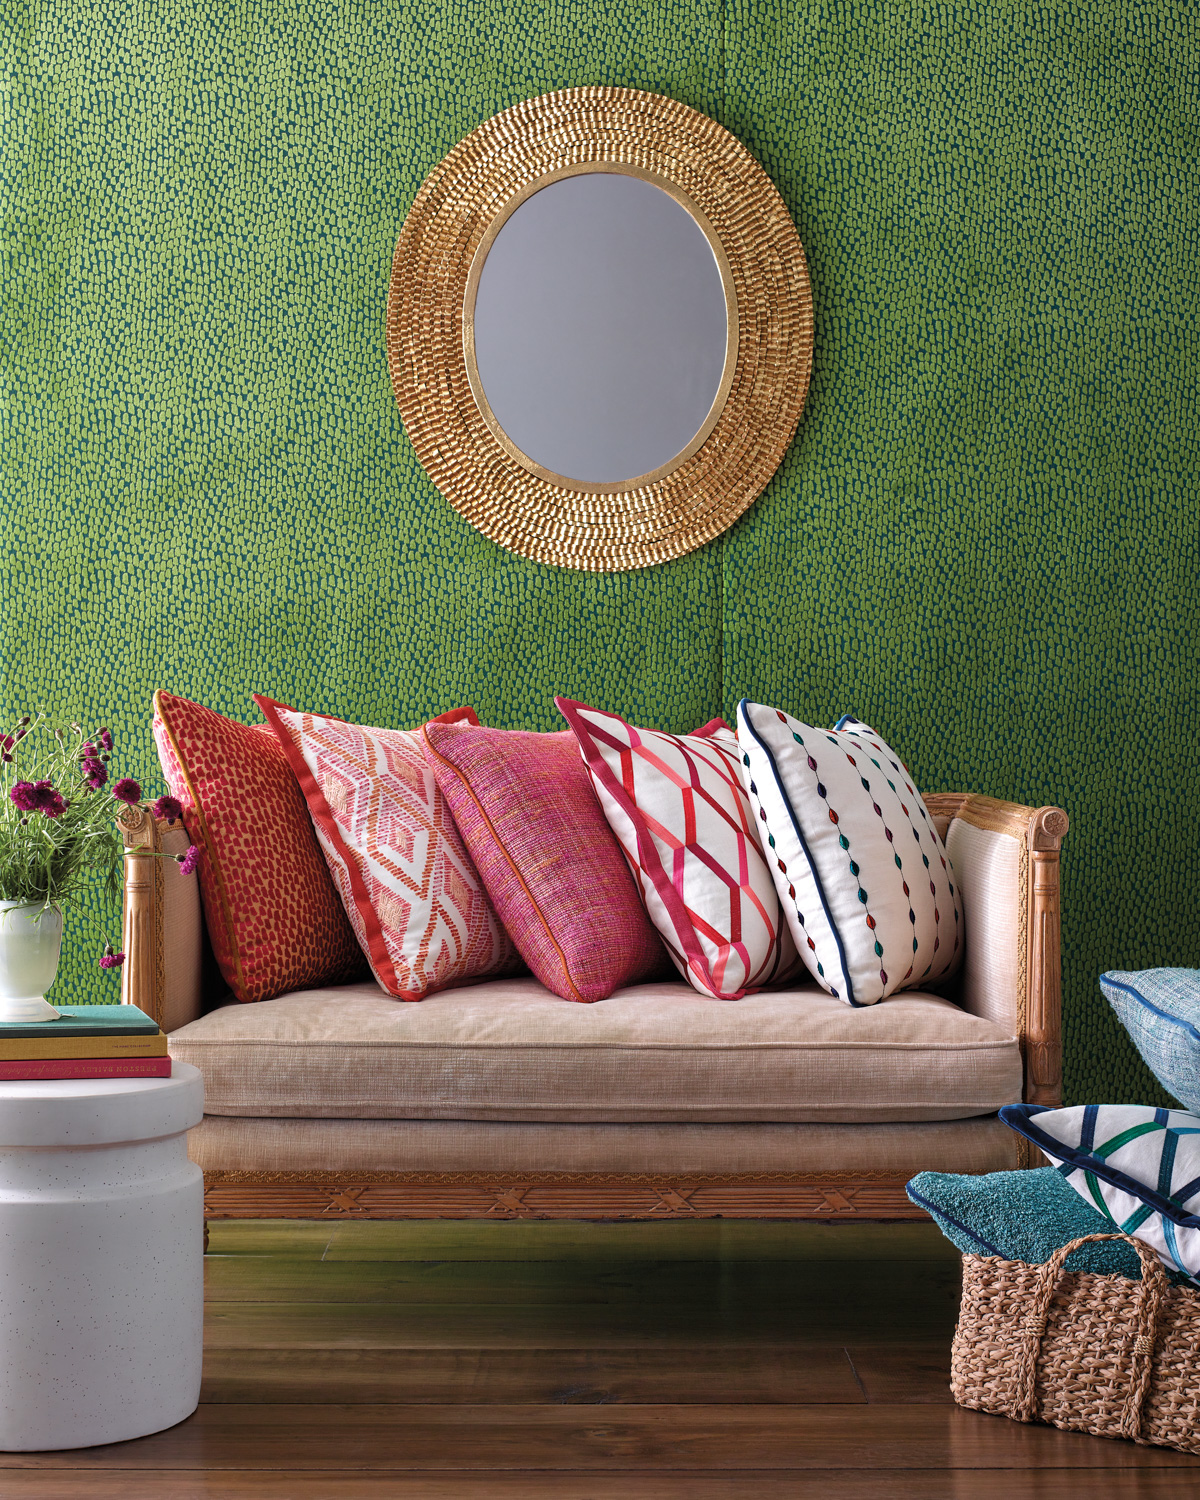 throw pillows in colorful patterned textiles on a sofa against a green wall